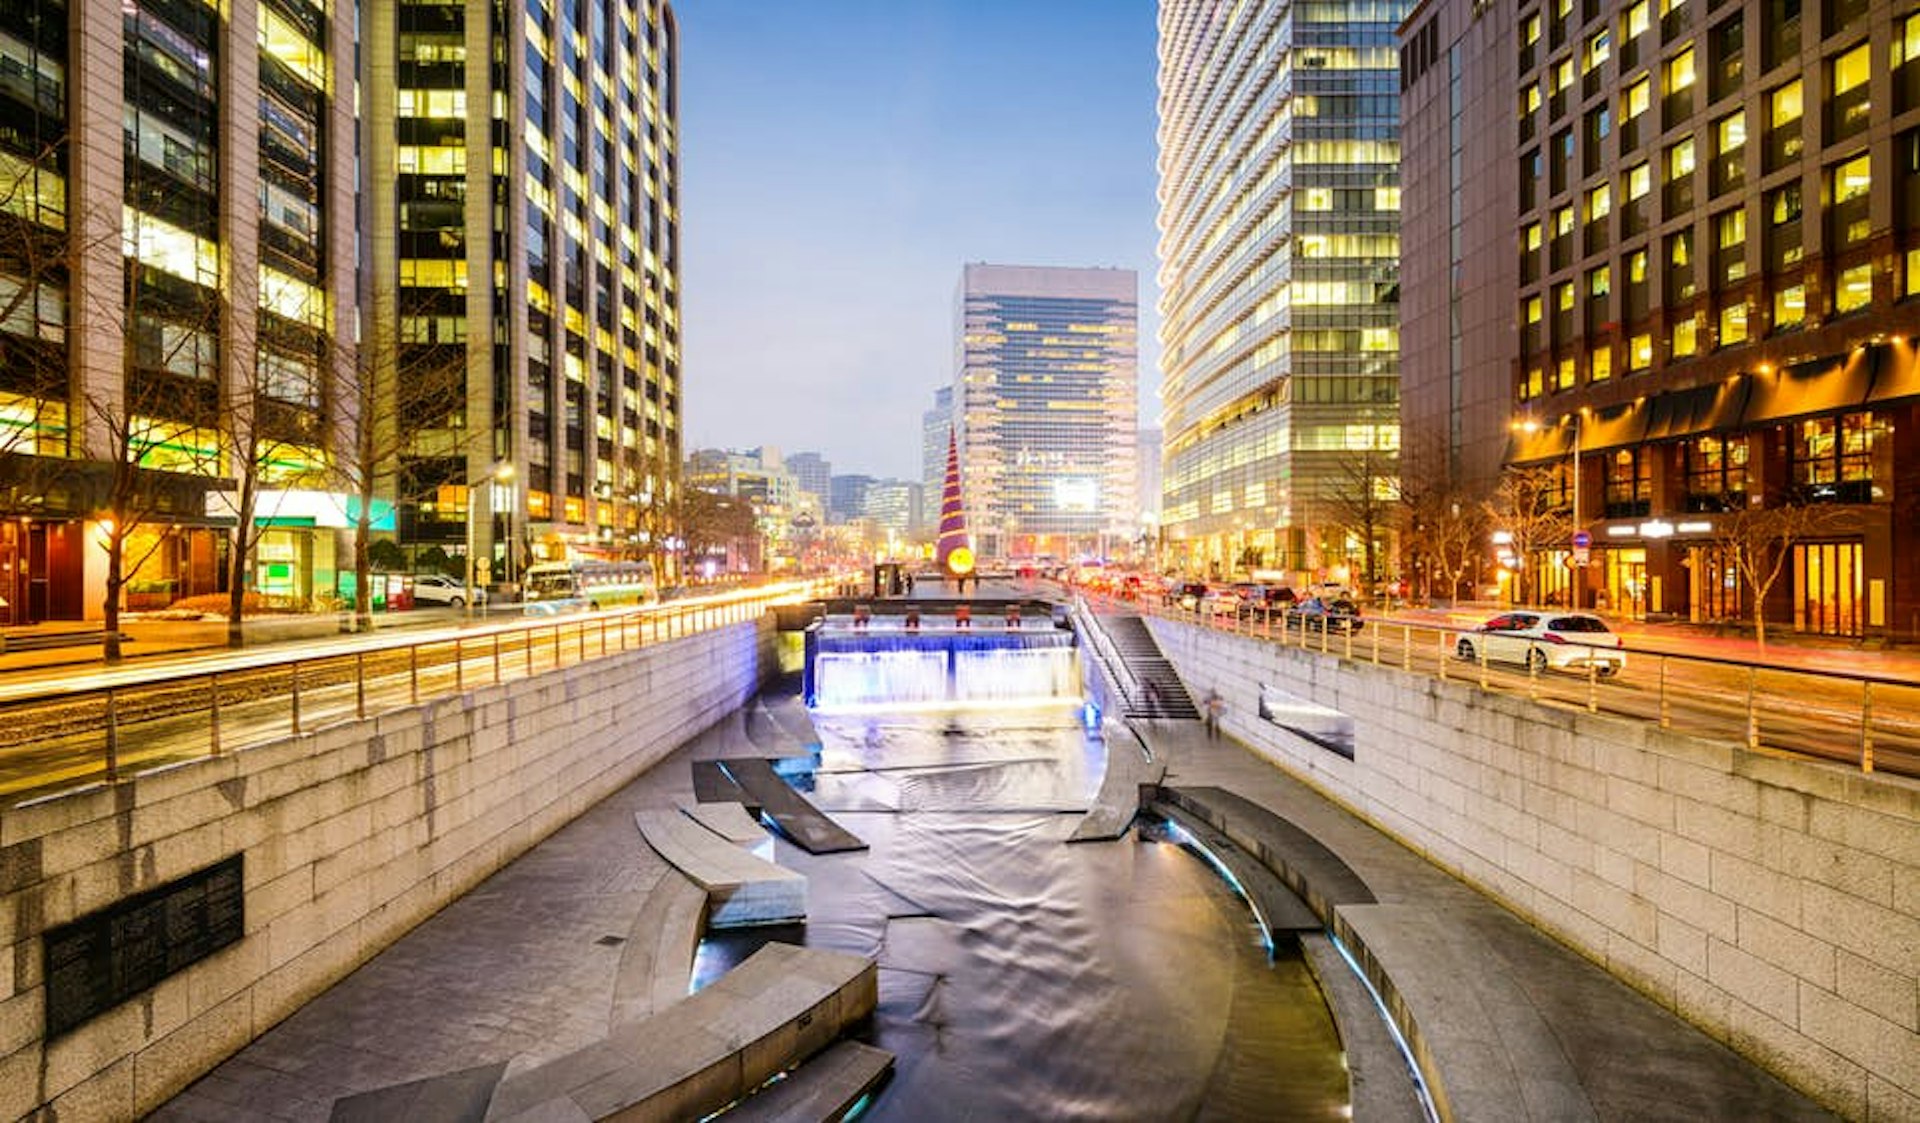 The Cheonggyecheon waterway is one of many projects transforming Seoul © ESB Professional / Shutterstock